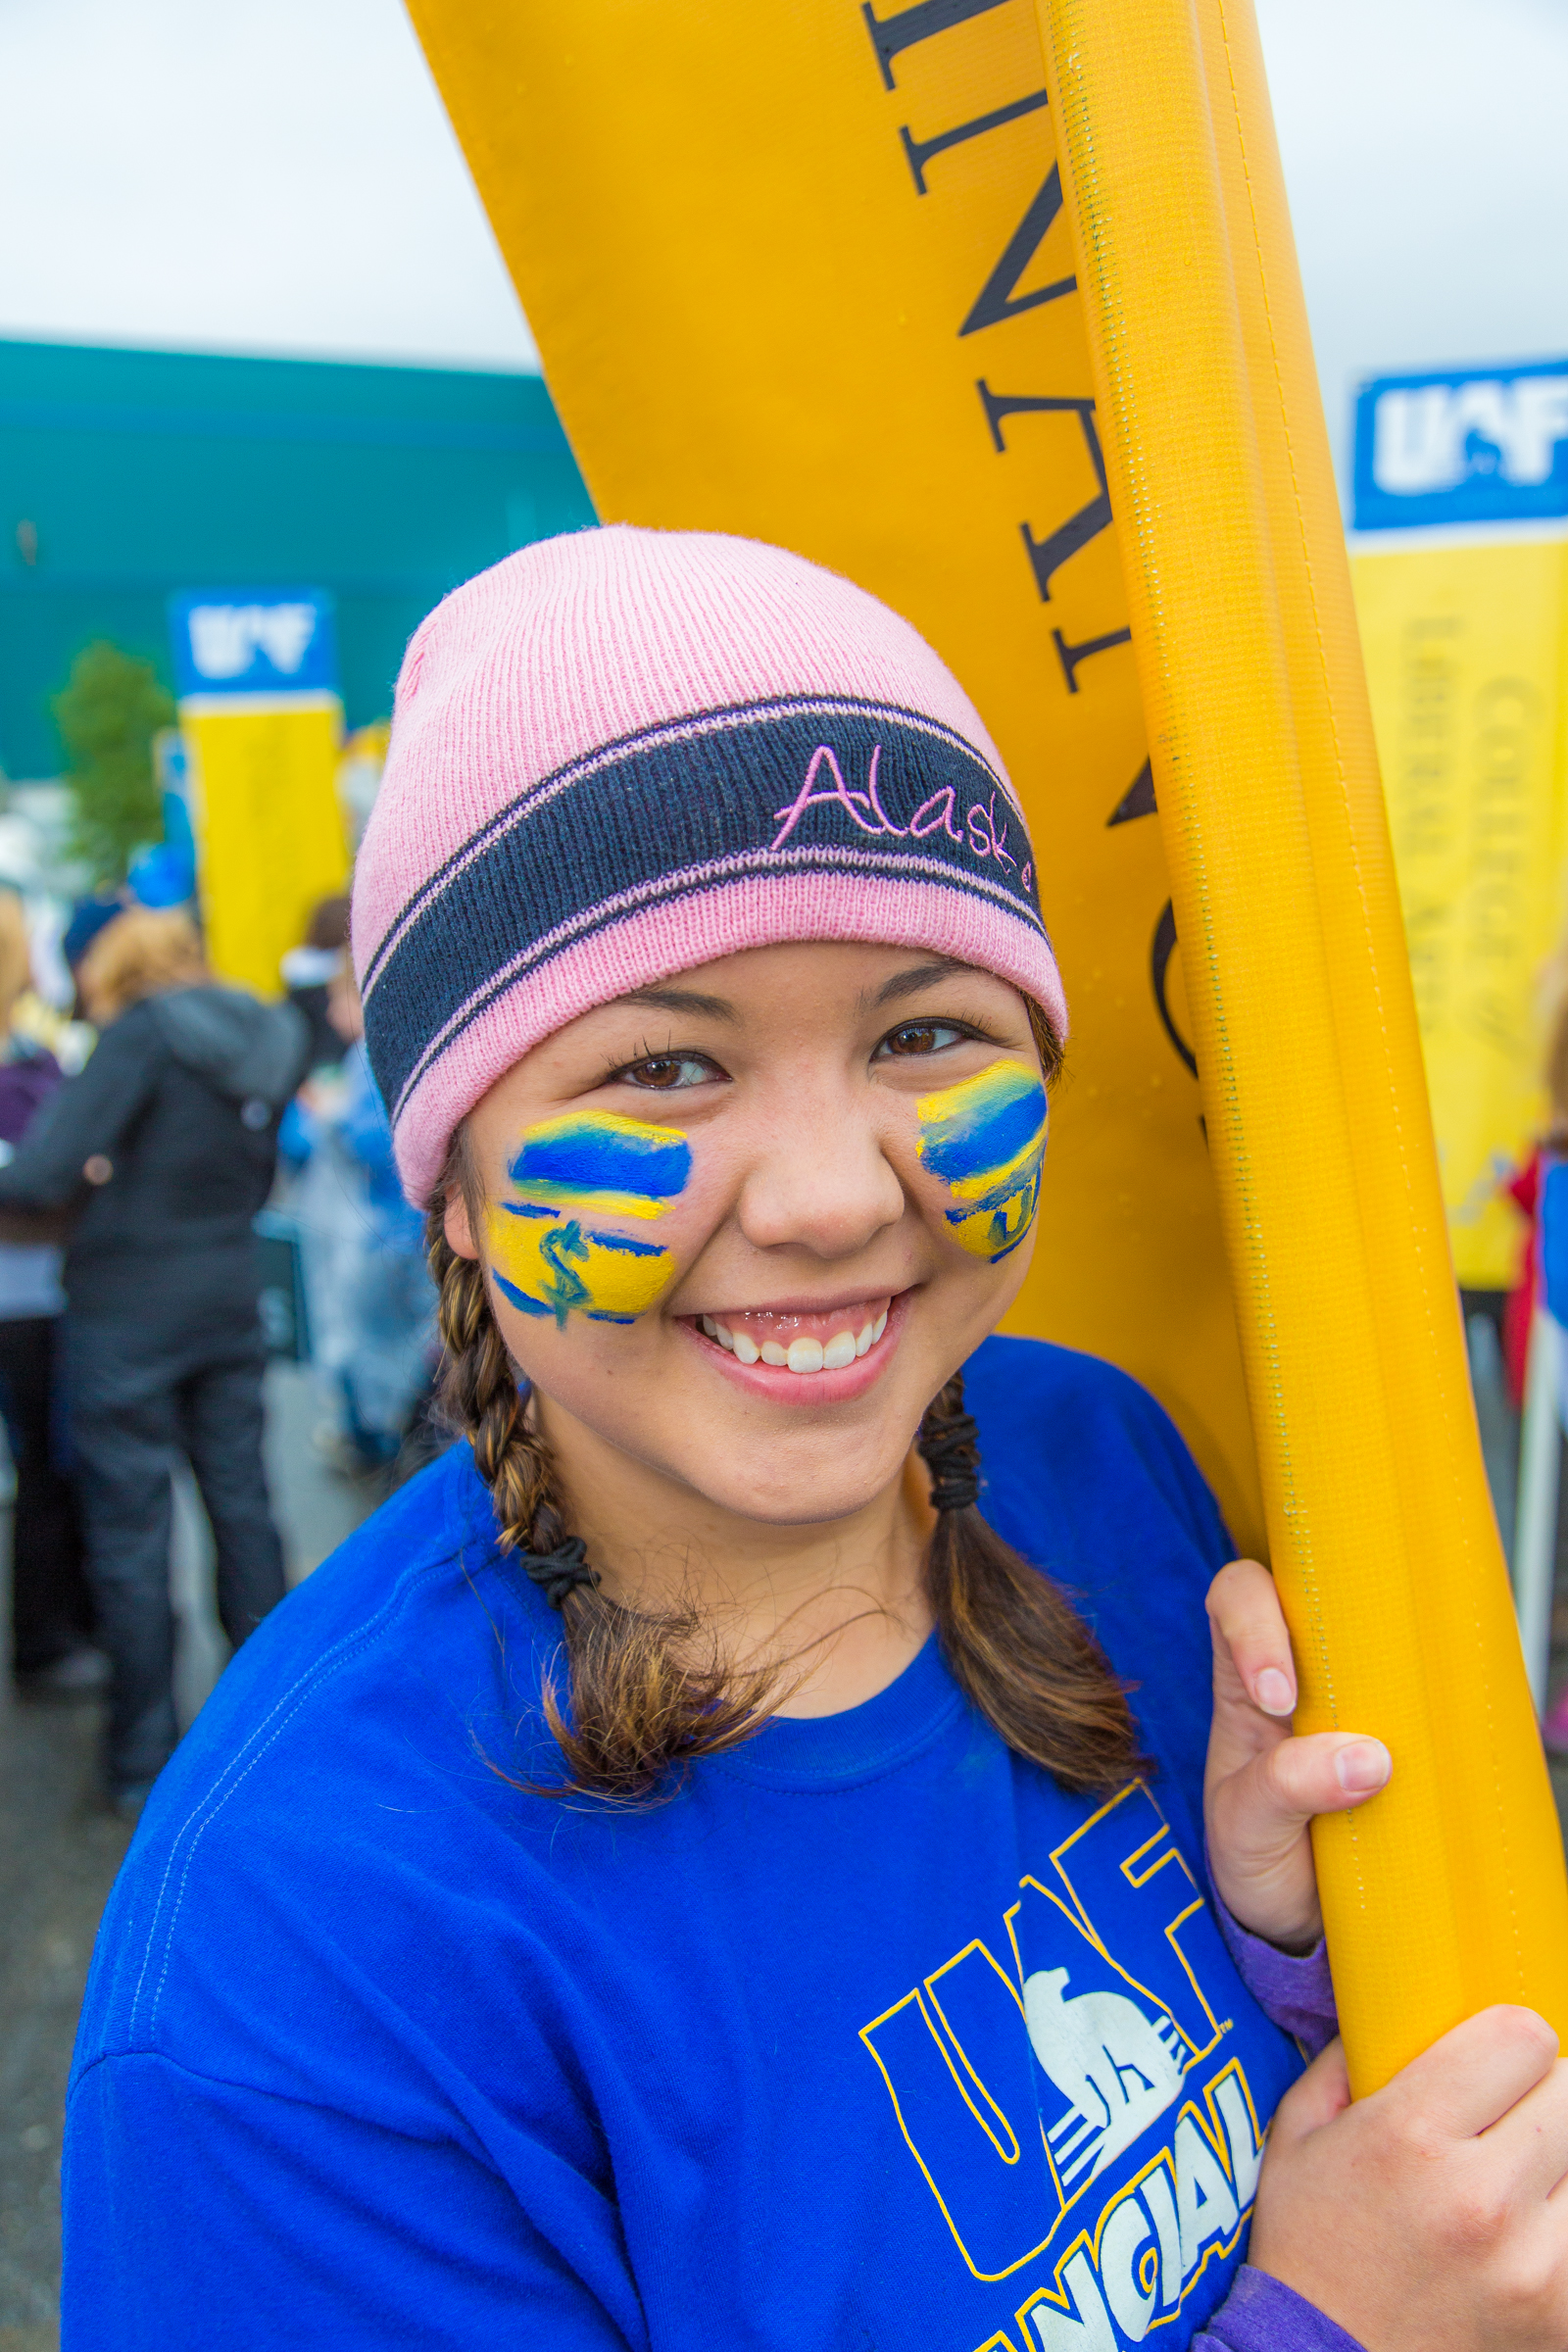 A person wearing a pink Alaska hat and wearing a blue UAF shirt. Their face is painted in blue and yellow.